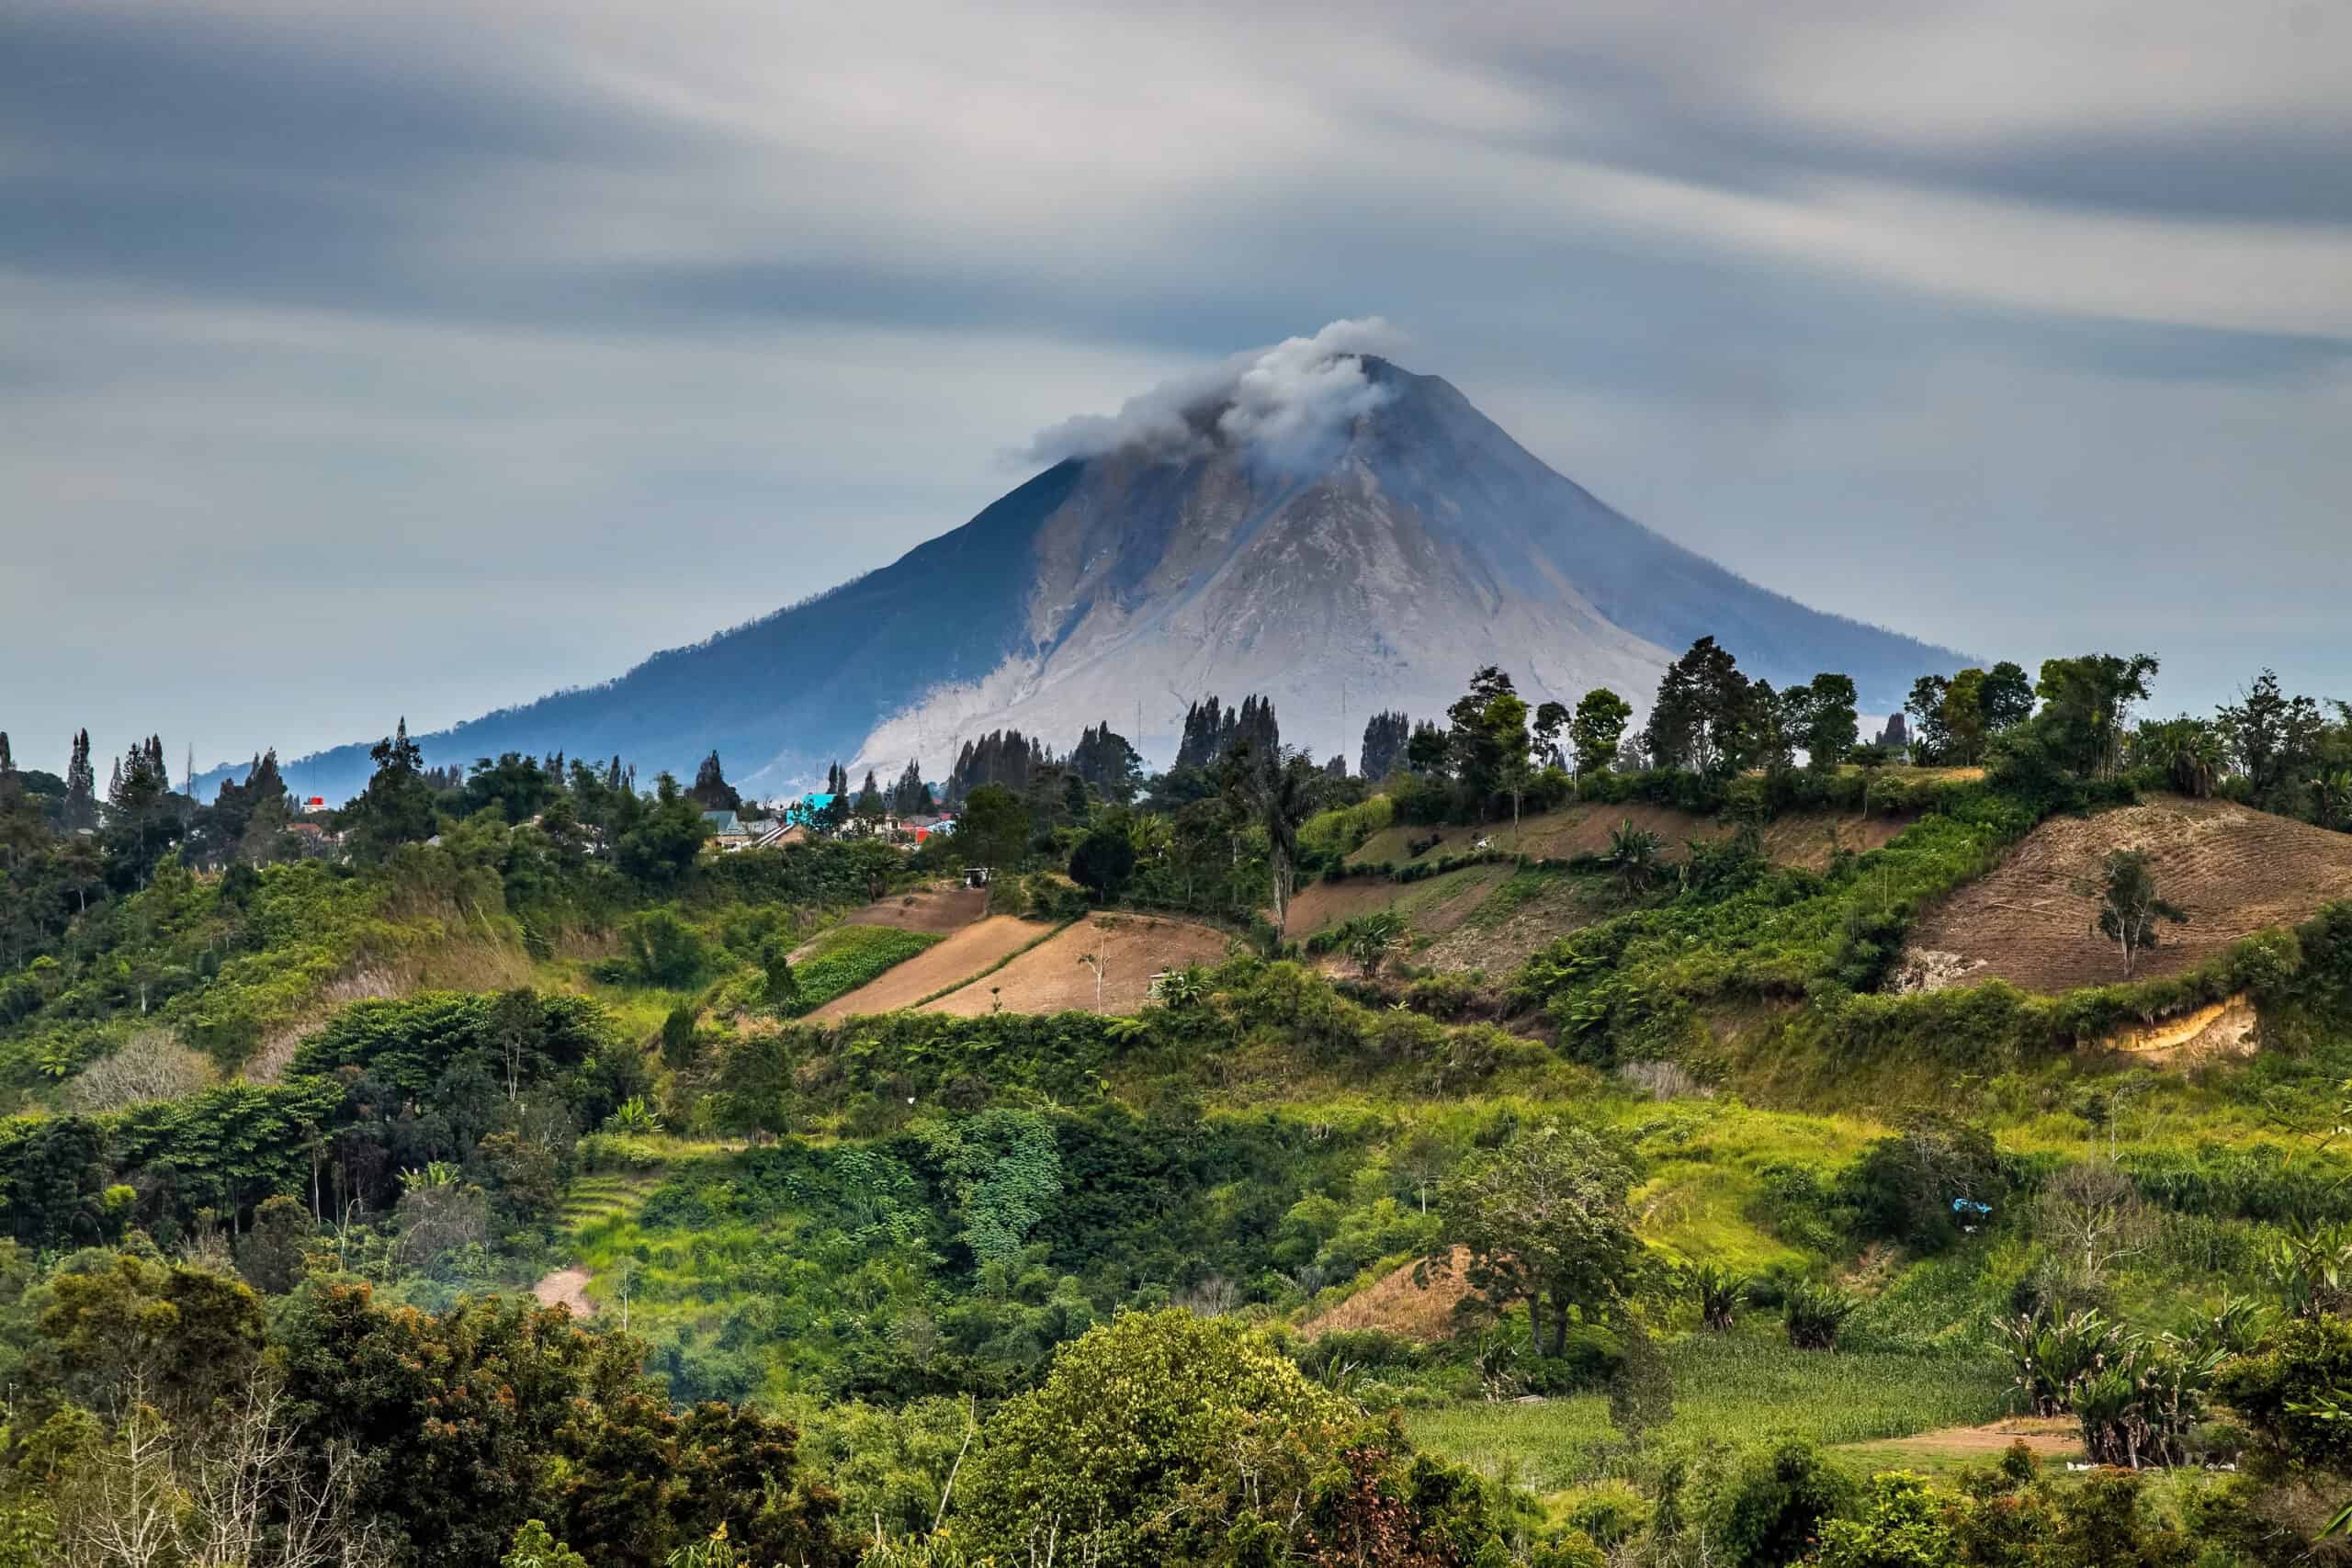 <p>Mount Sinabung, a highly active stratovolcano on Sumatra Island, Indonesia, offers expansive views but is notorious for its frequent and violent eruptions. Dormant for centuries, the volcano reawakened in 2010 and has since caused significant devastation with pyroclastic flows, ash clouds, and lava. </p> <p>Despite the inherent risks, the lush surroundings and dramatic landscape attract hikers and nature enthusiasts eager to experience its awe-inspiring beauty. Visitors must be cautious, as the volcano’s unpredictable activity poses constant danger to the local population and environment.</p>